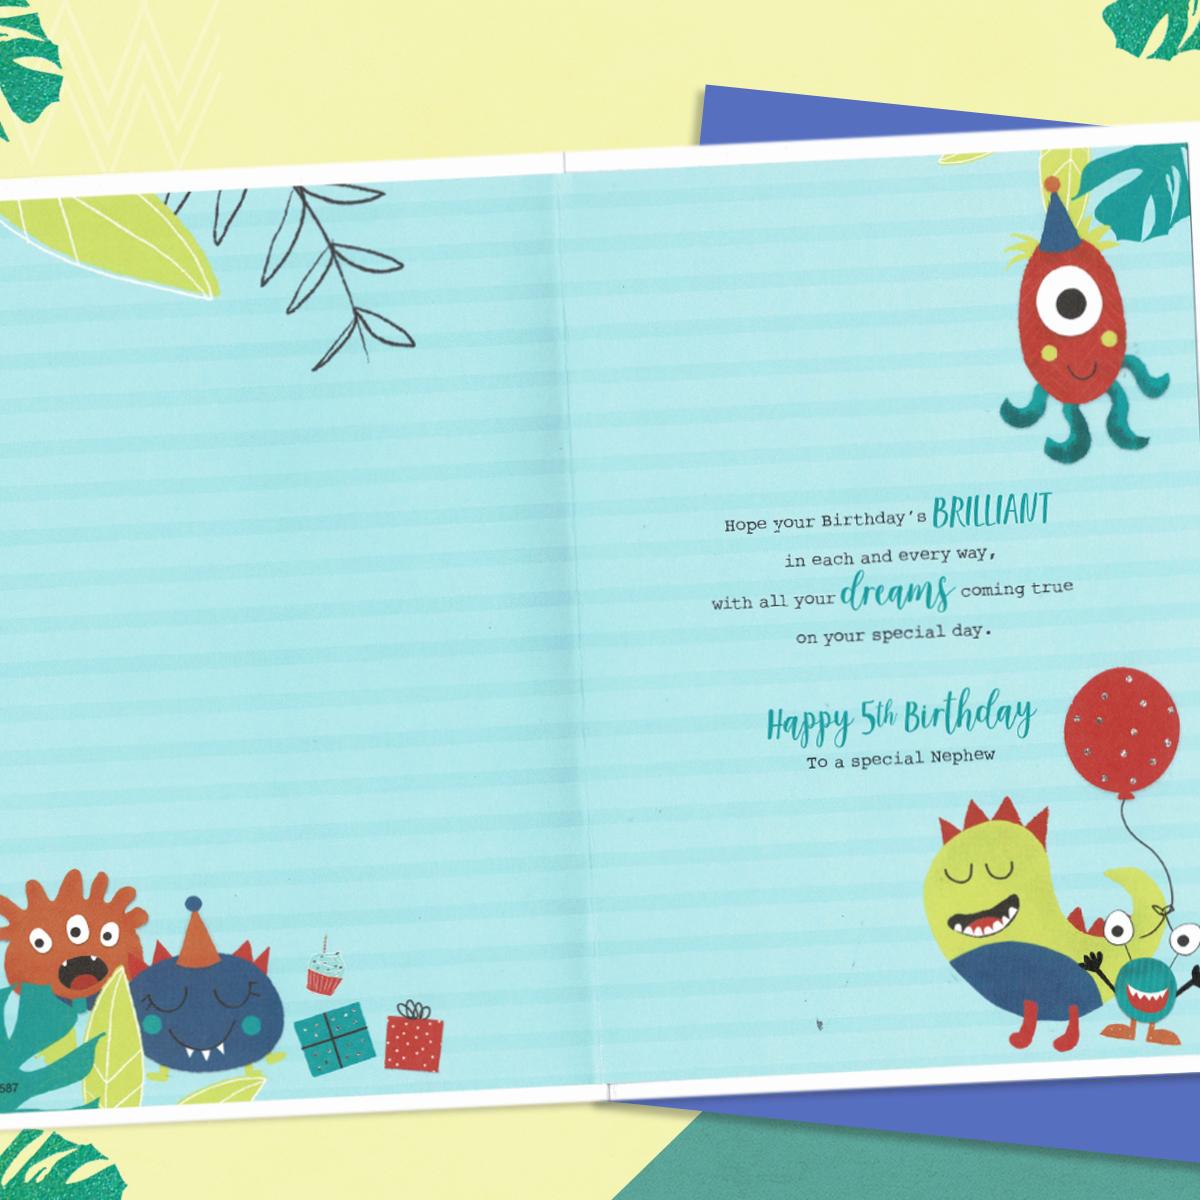 Inside Image Showing Layout And Printed Text Of Nephew Age 5 Card